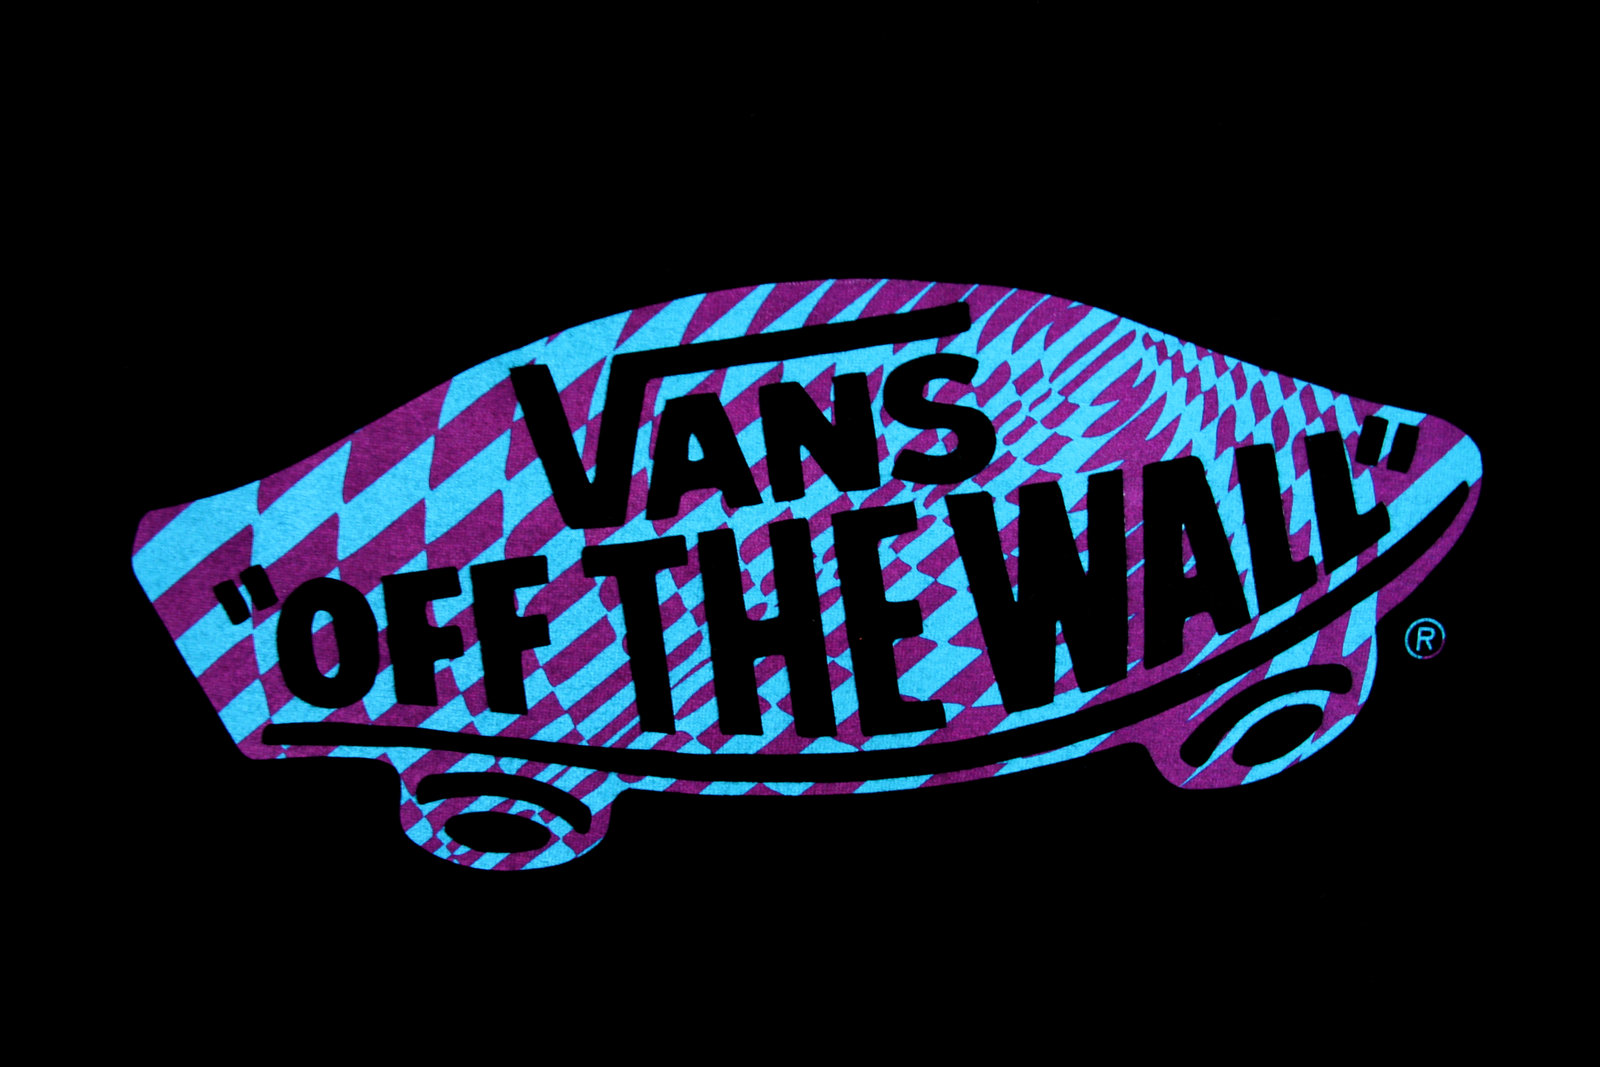 the wall of vans